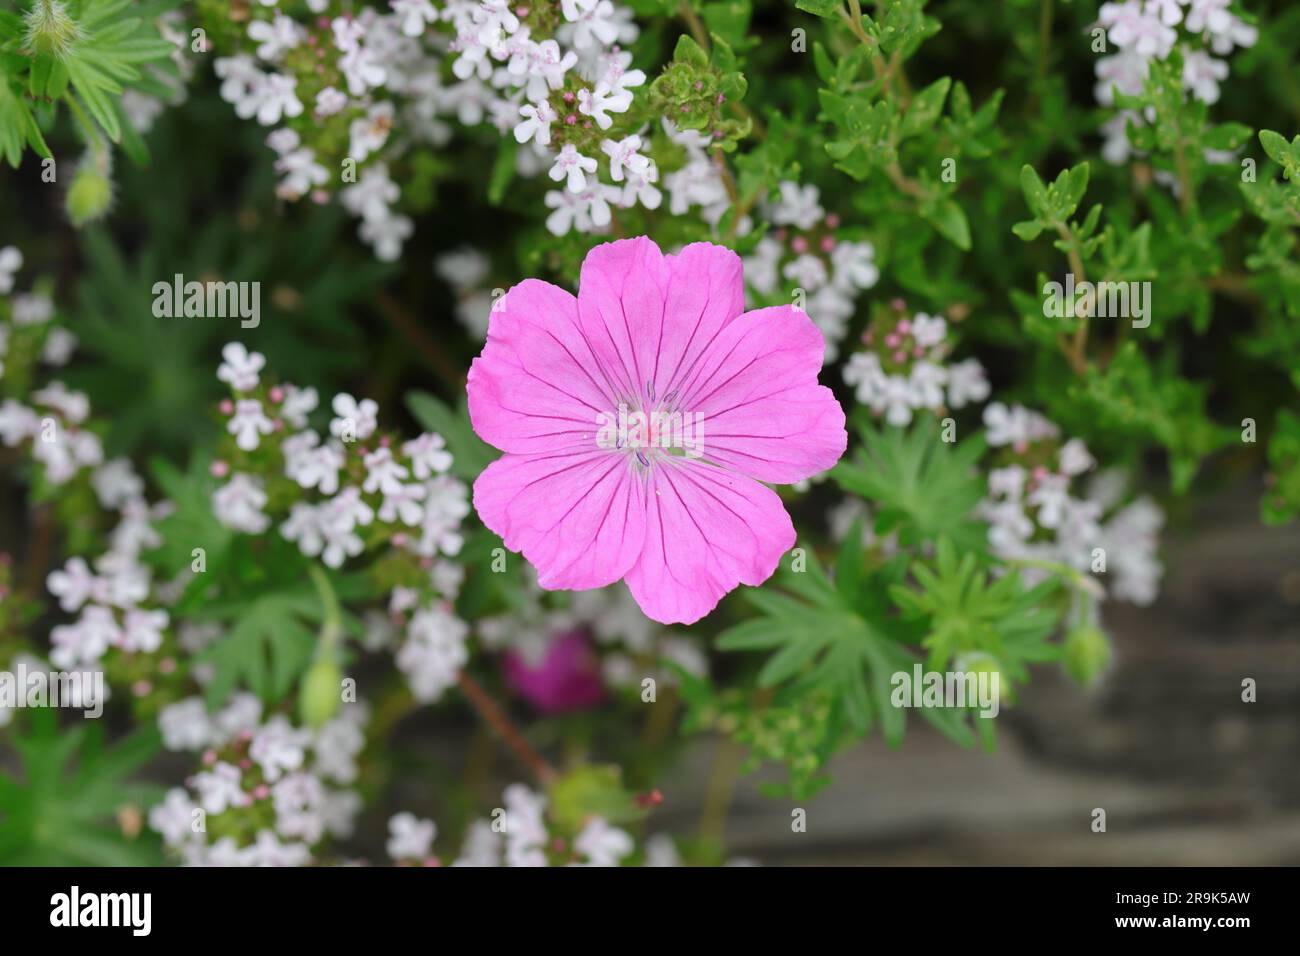 Close-up of a single pink cranesbill flower among white flowers in a flower bed, selective focus Stock Photo